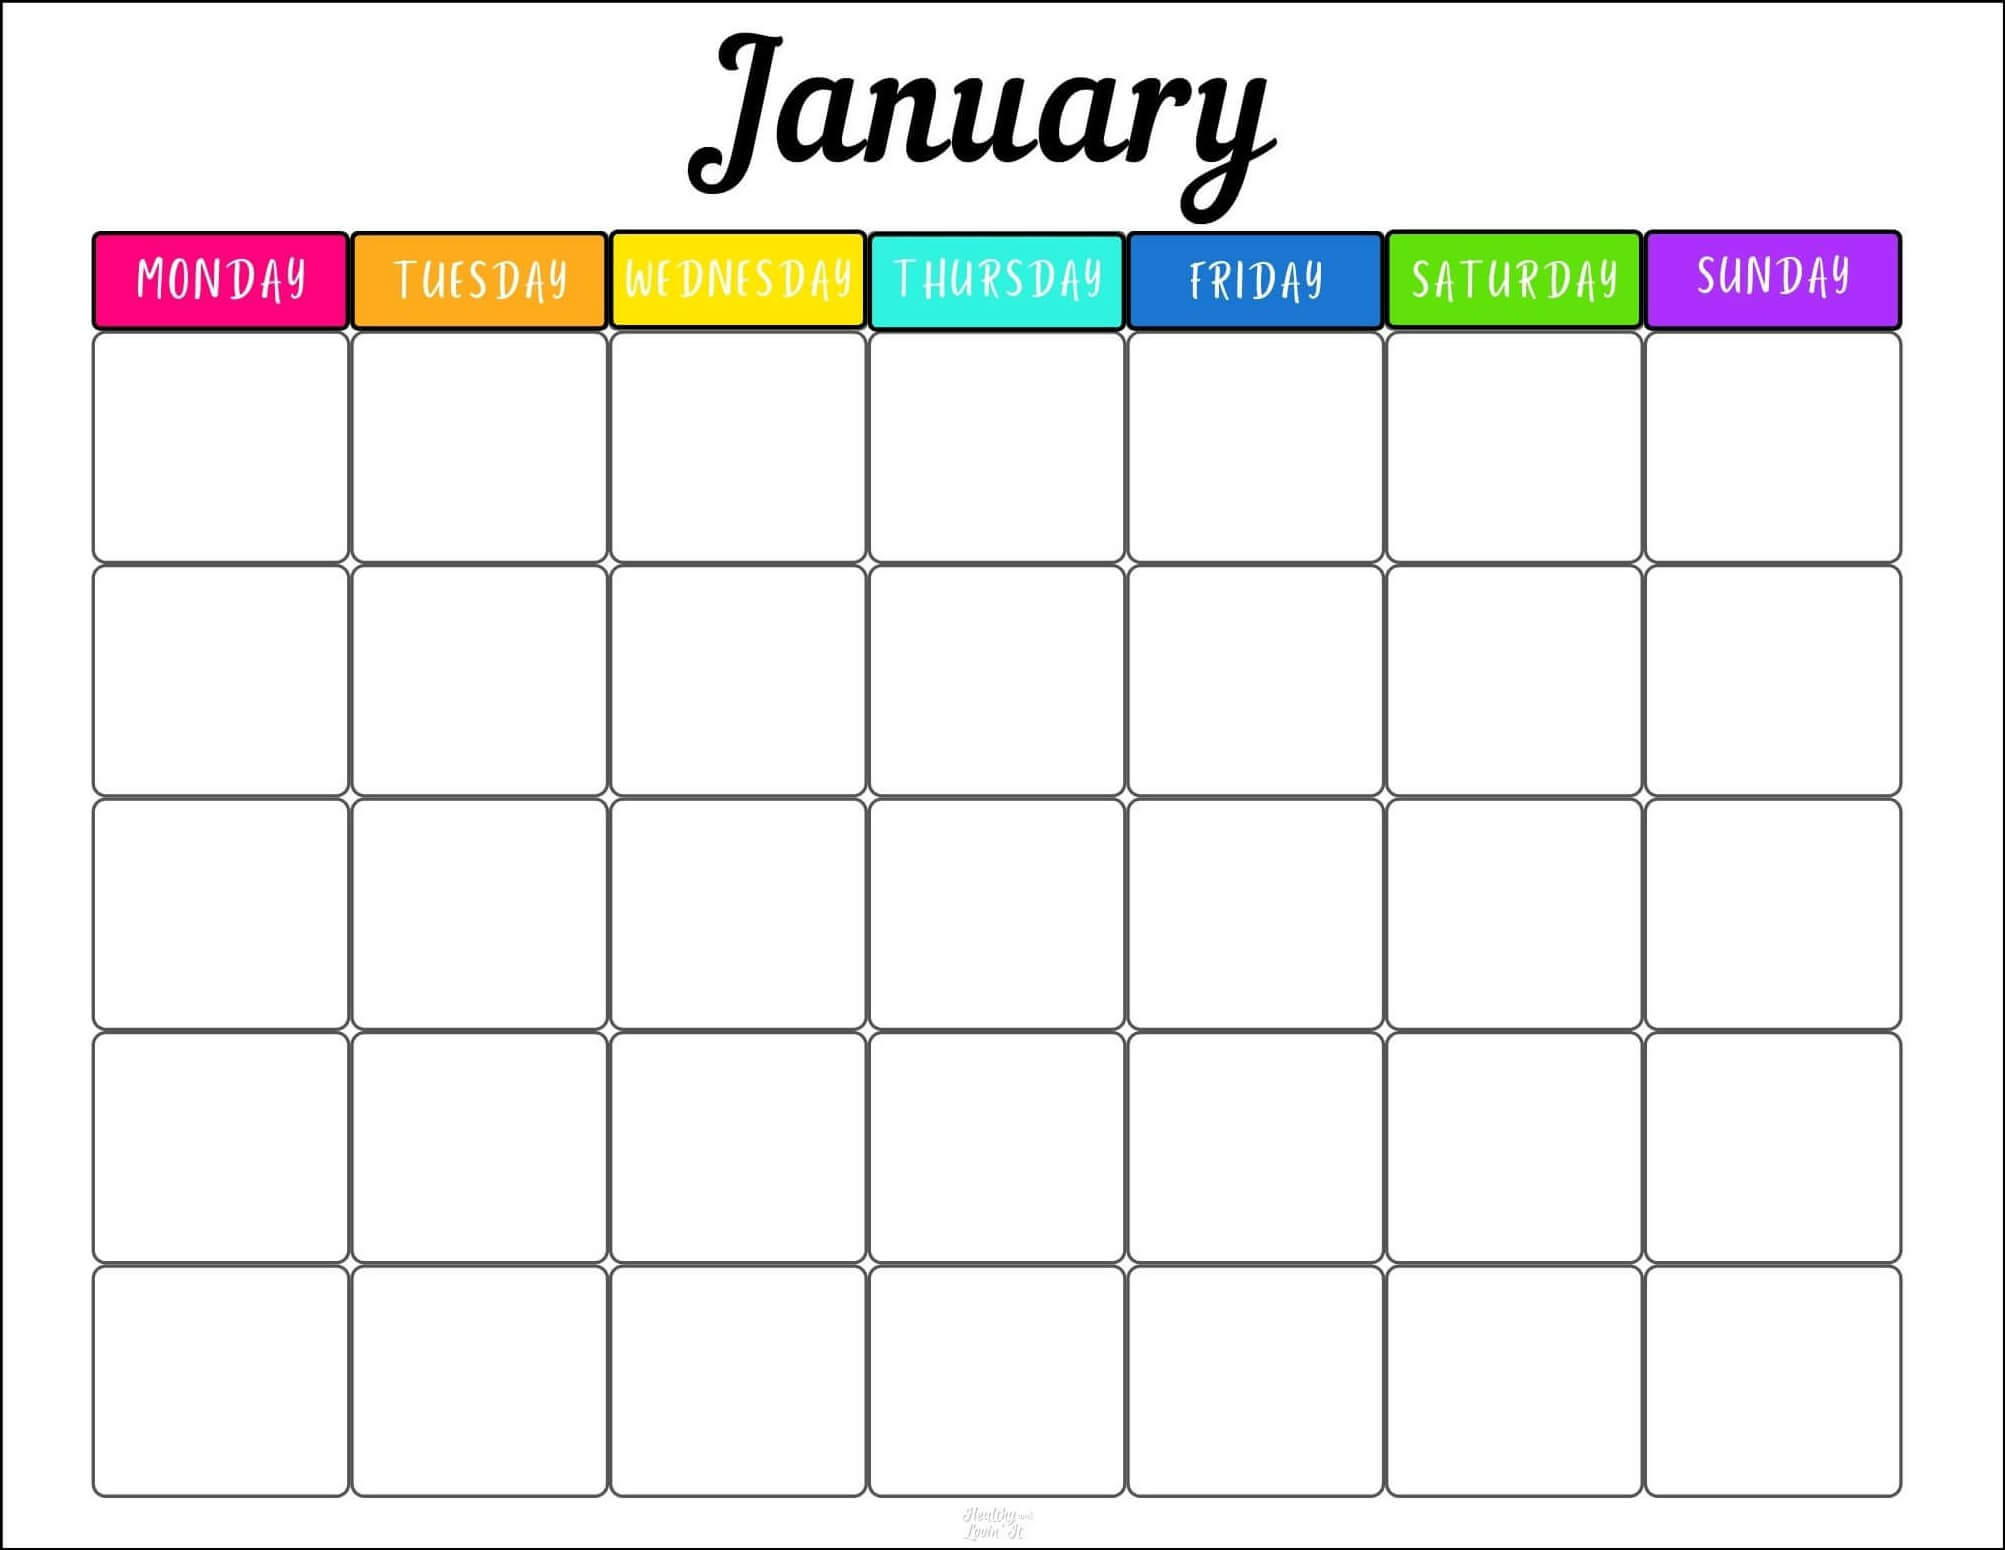 Free Printable Monthly Schedule TemplateTwo Cute Designs!